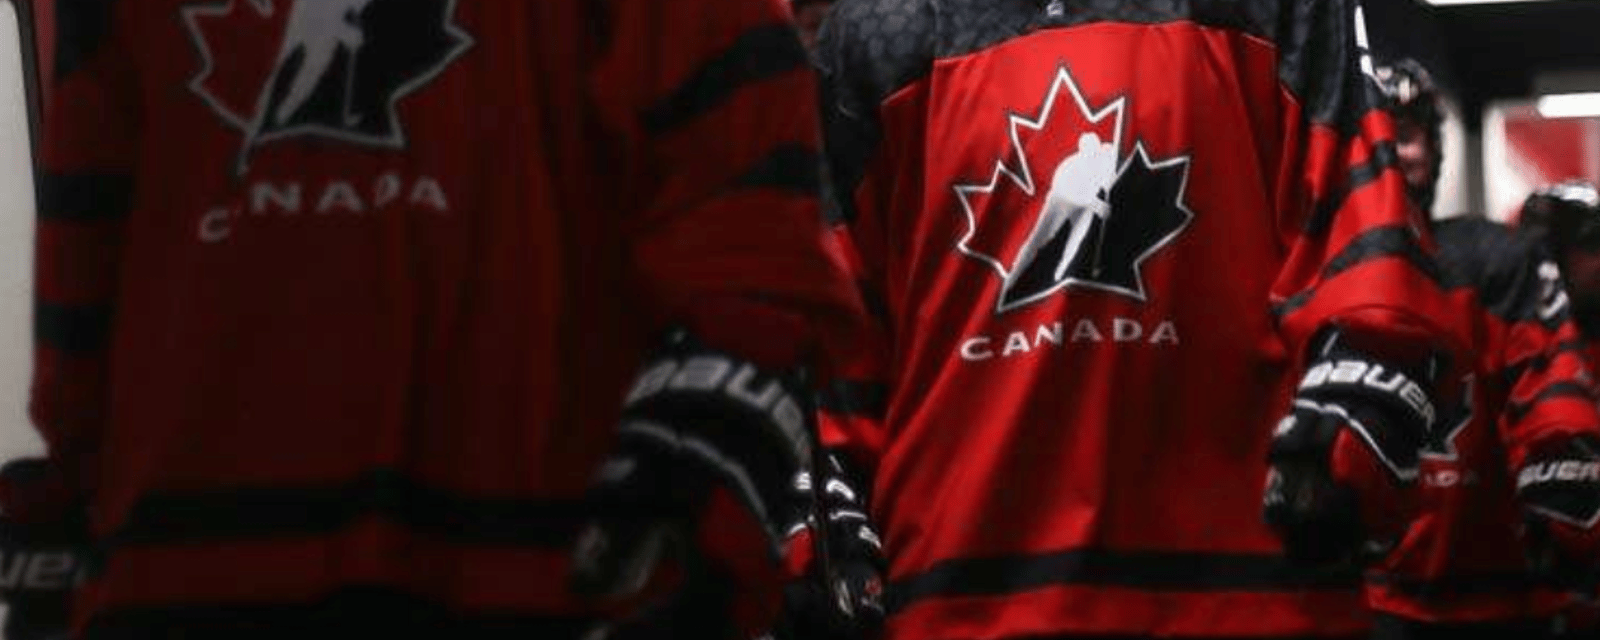 More blows to Hockey Canada and they better keep coming!